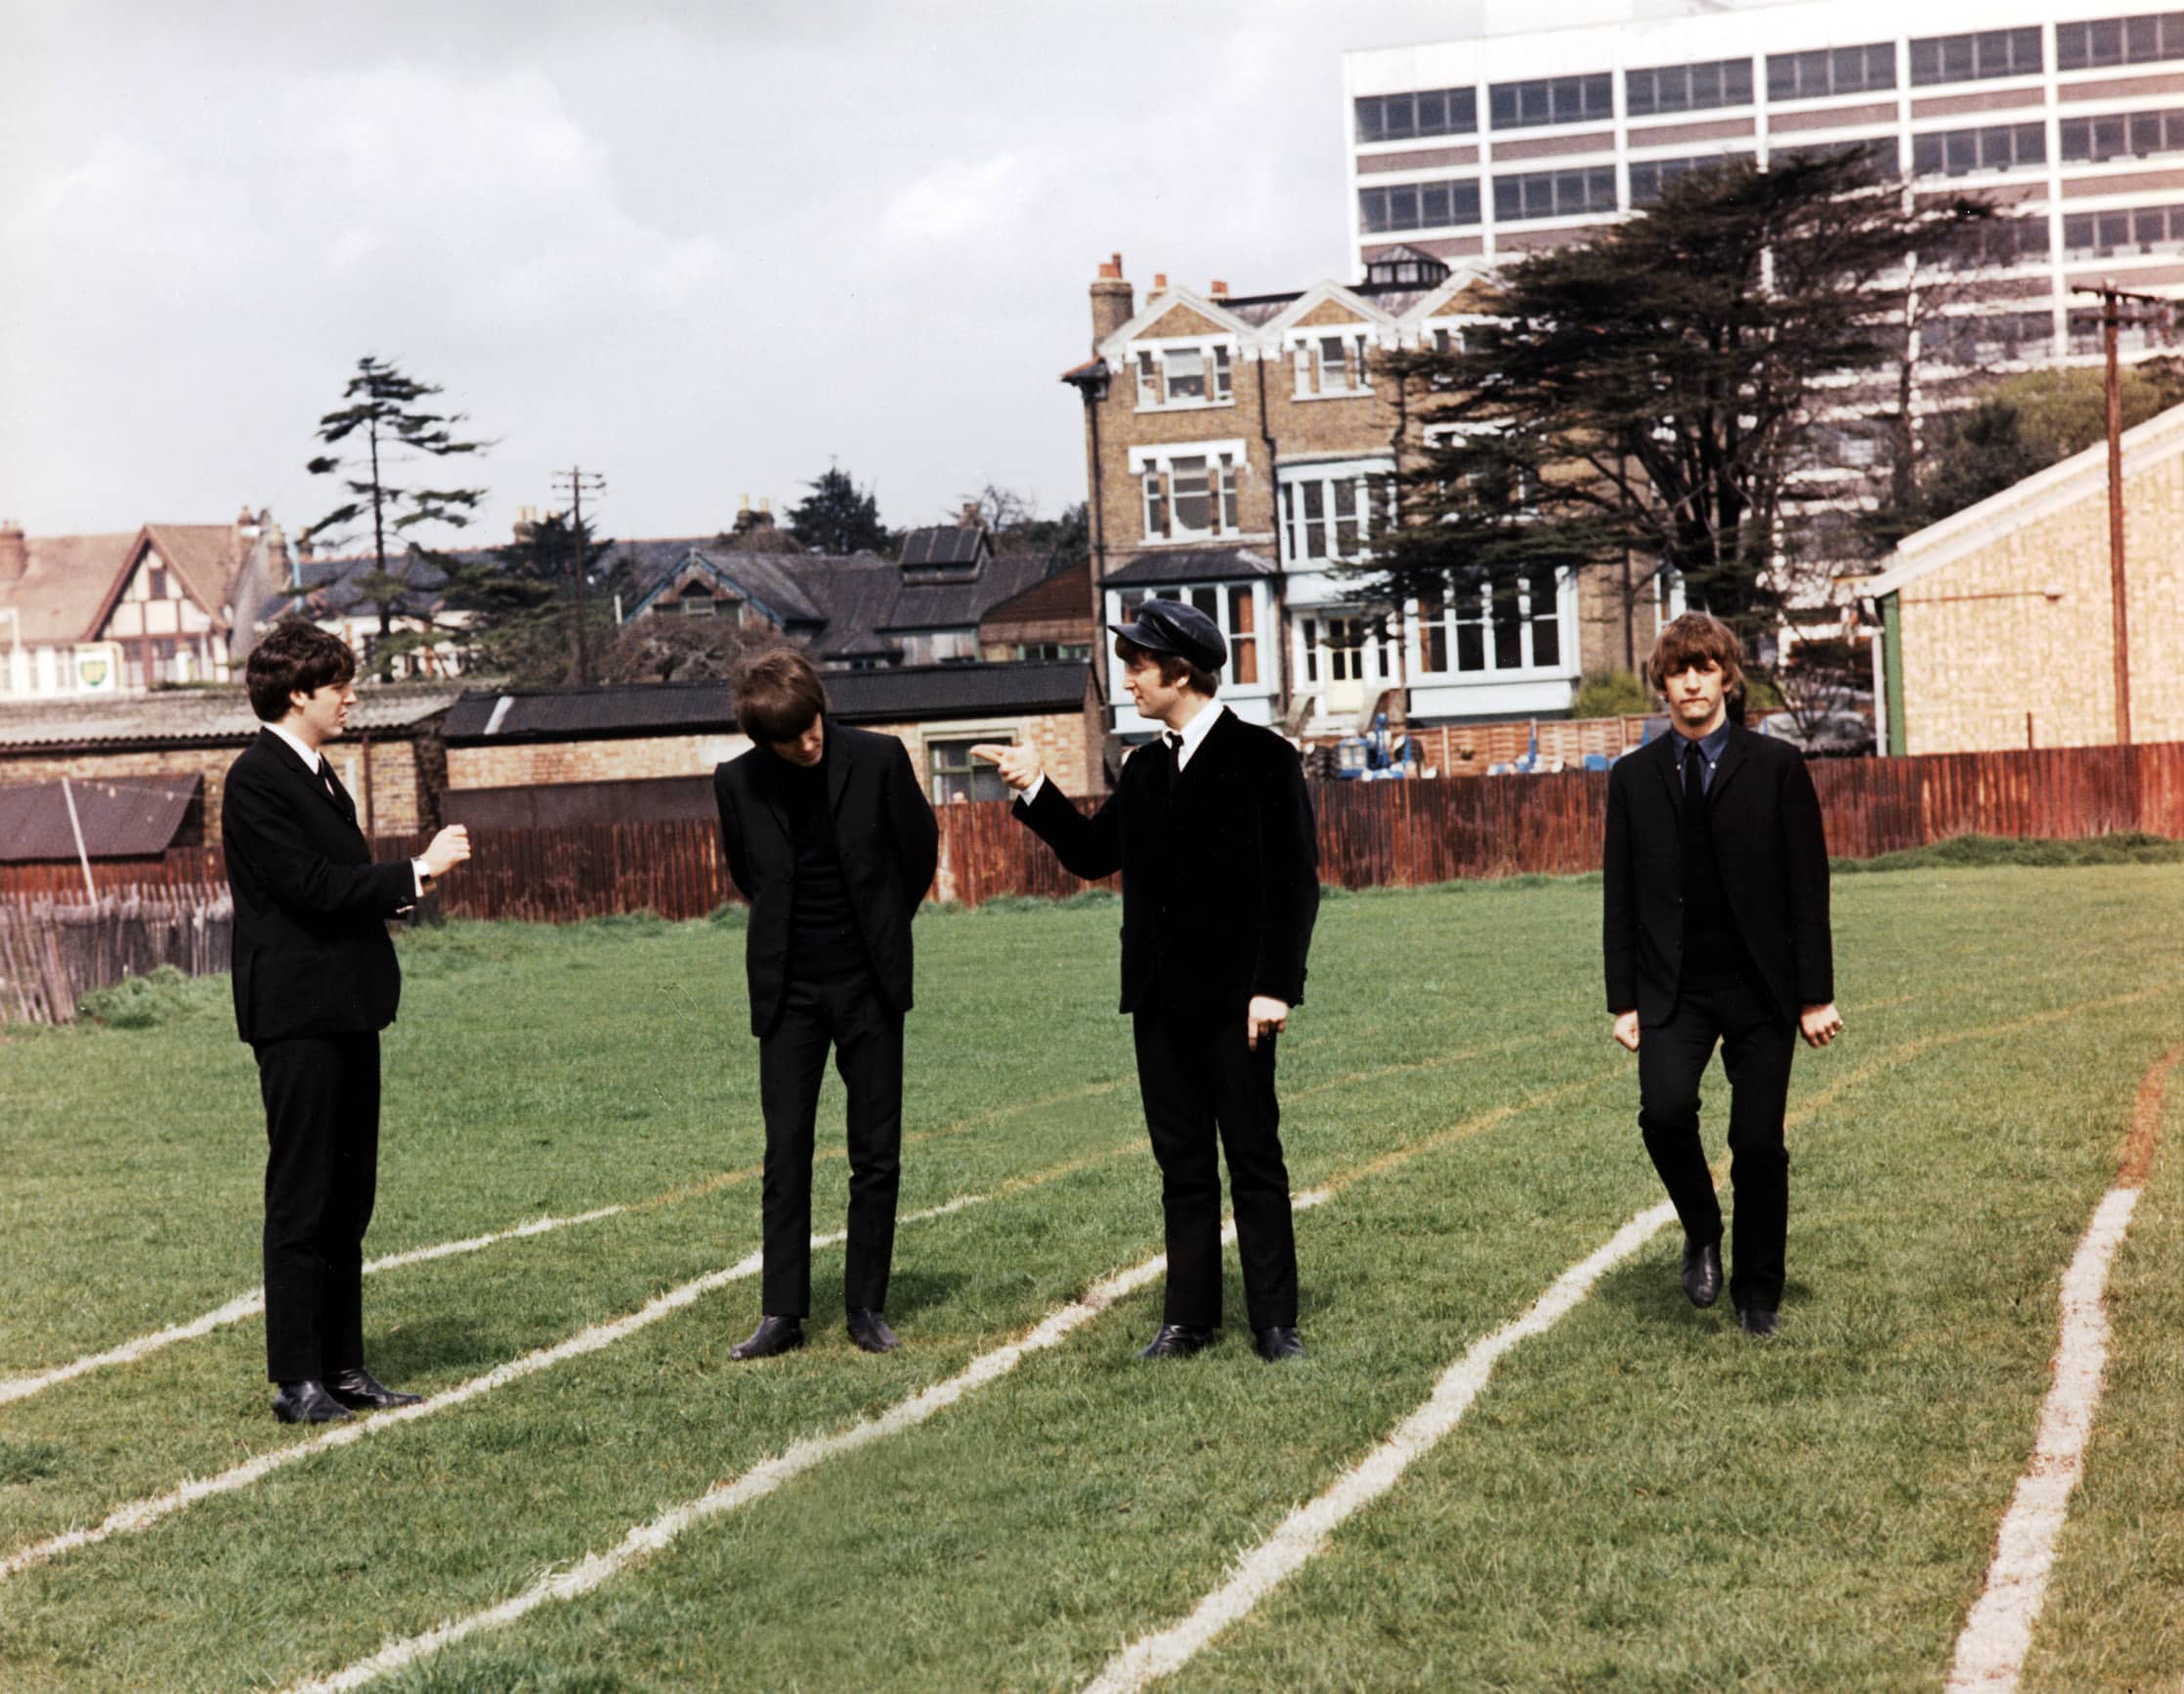 The Beatles: Paul McCartney, George Harrison, John Lennon, Ringo Starr pose on a cricket field, during the production of A HARD DAY'S NIGHT, 1964